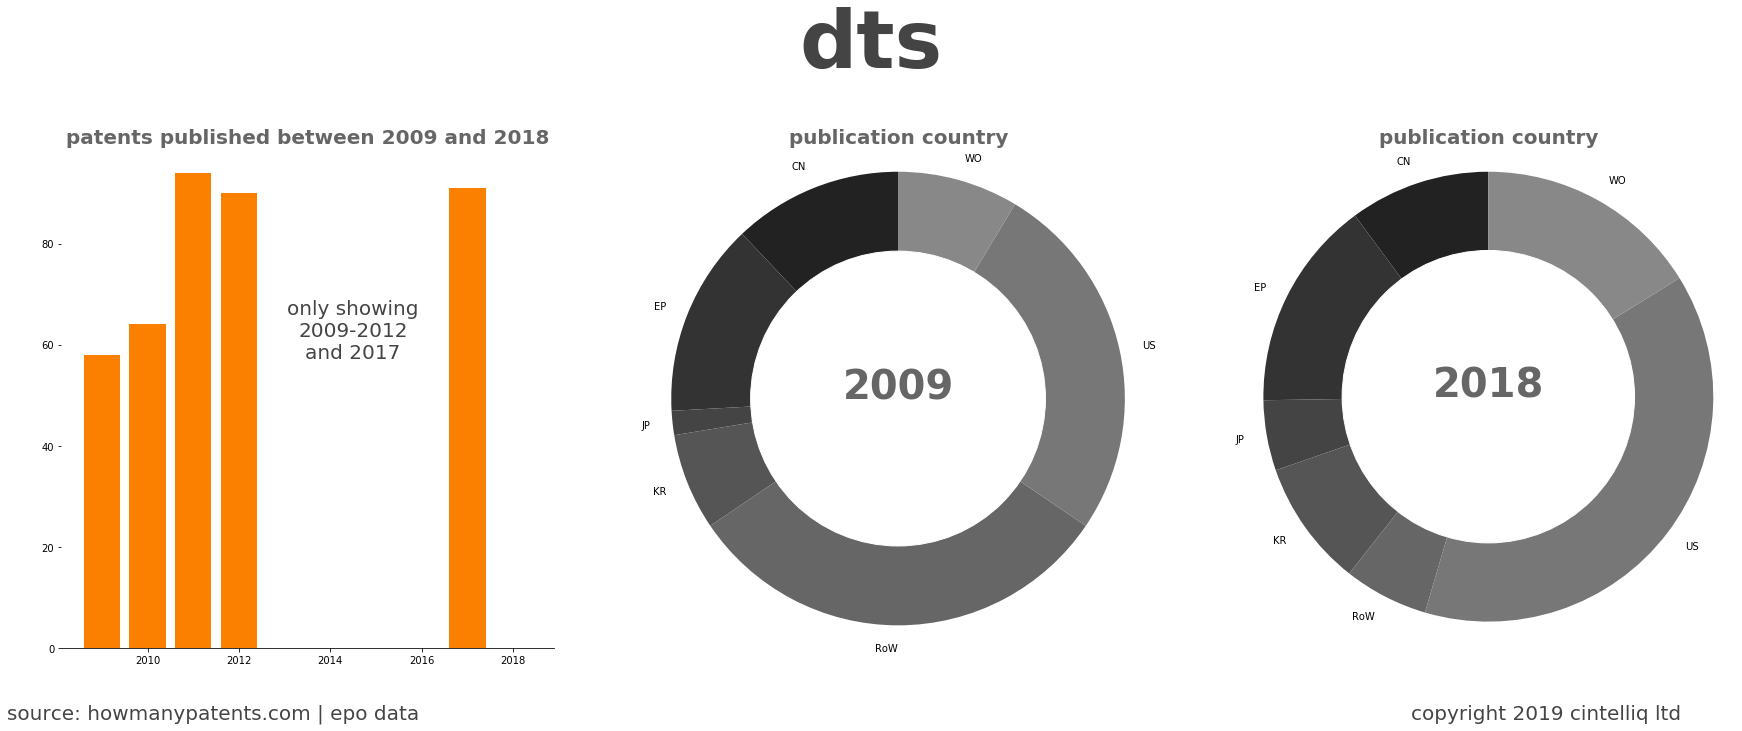 summary of patents for Dts